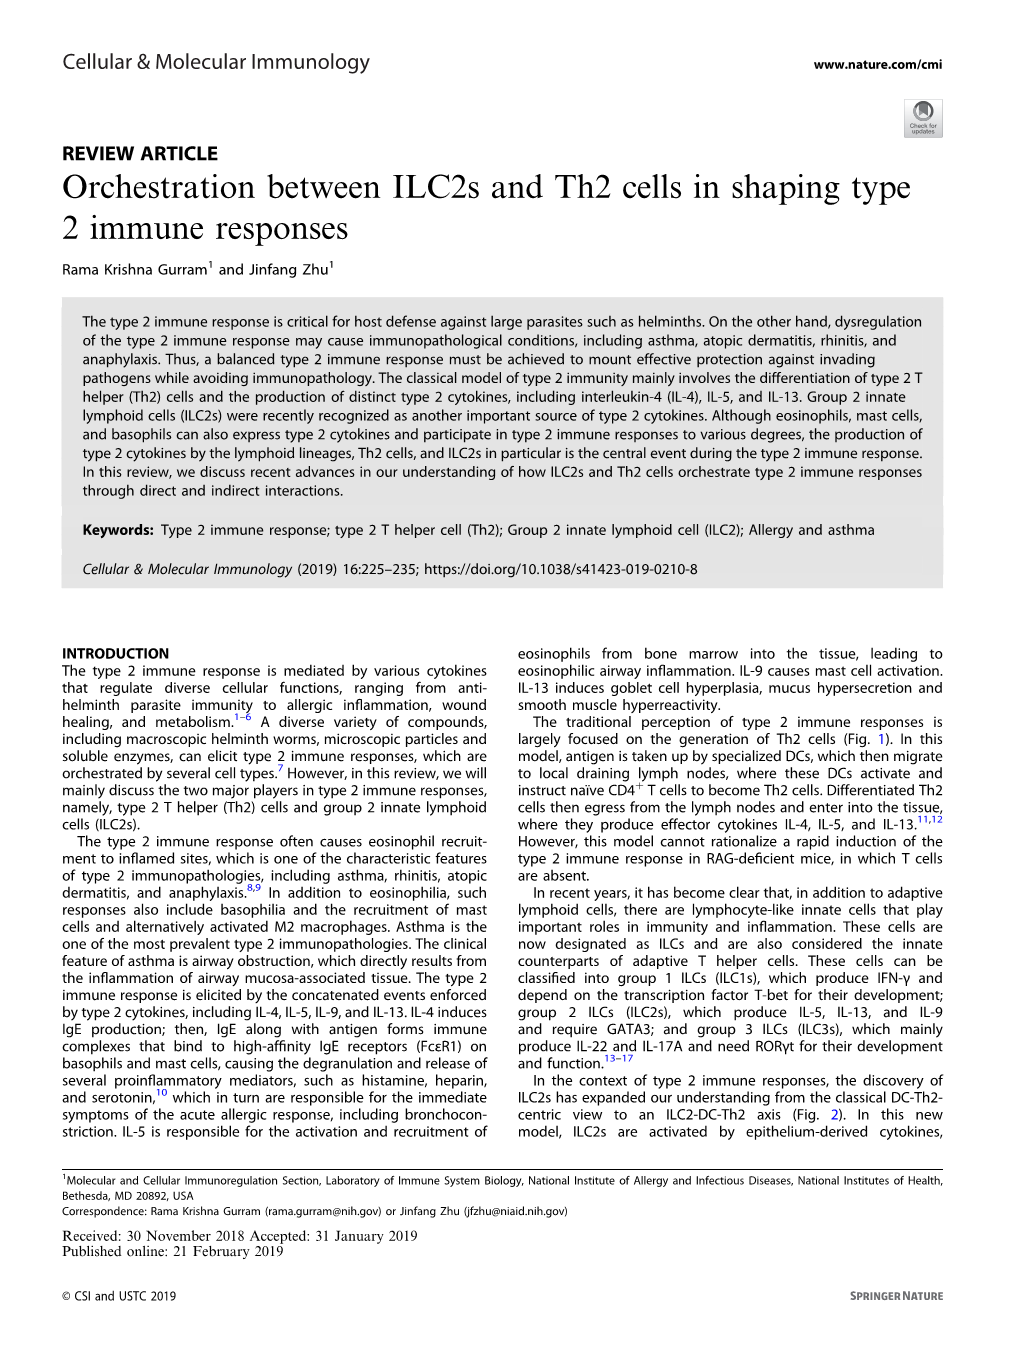 Orchestration Between Ilc2s and Th2 Cells in Shaping Type 2 Immune Responses